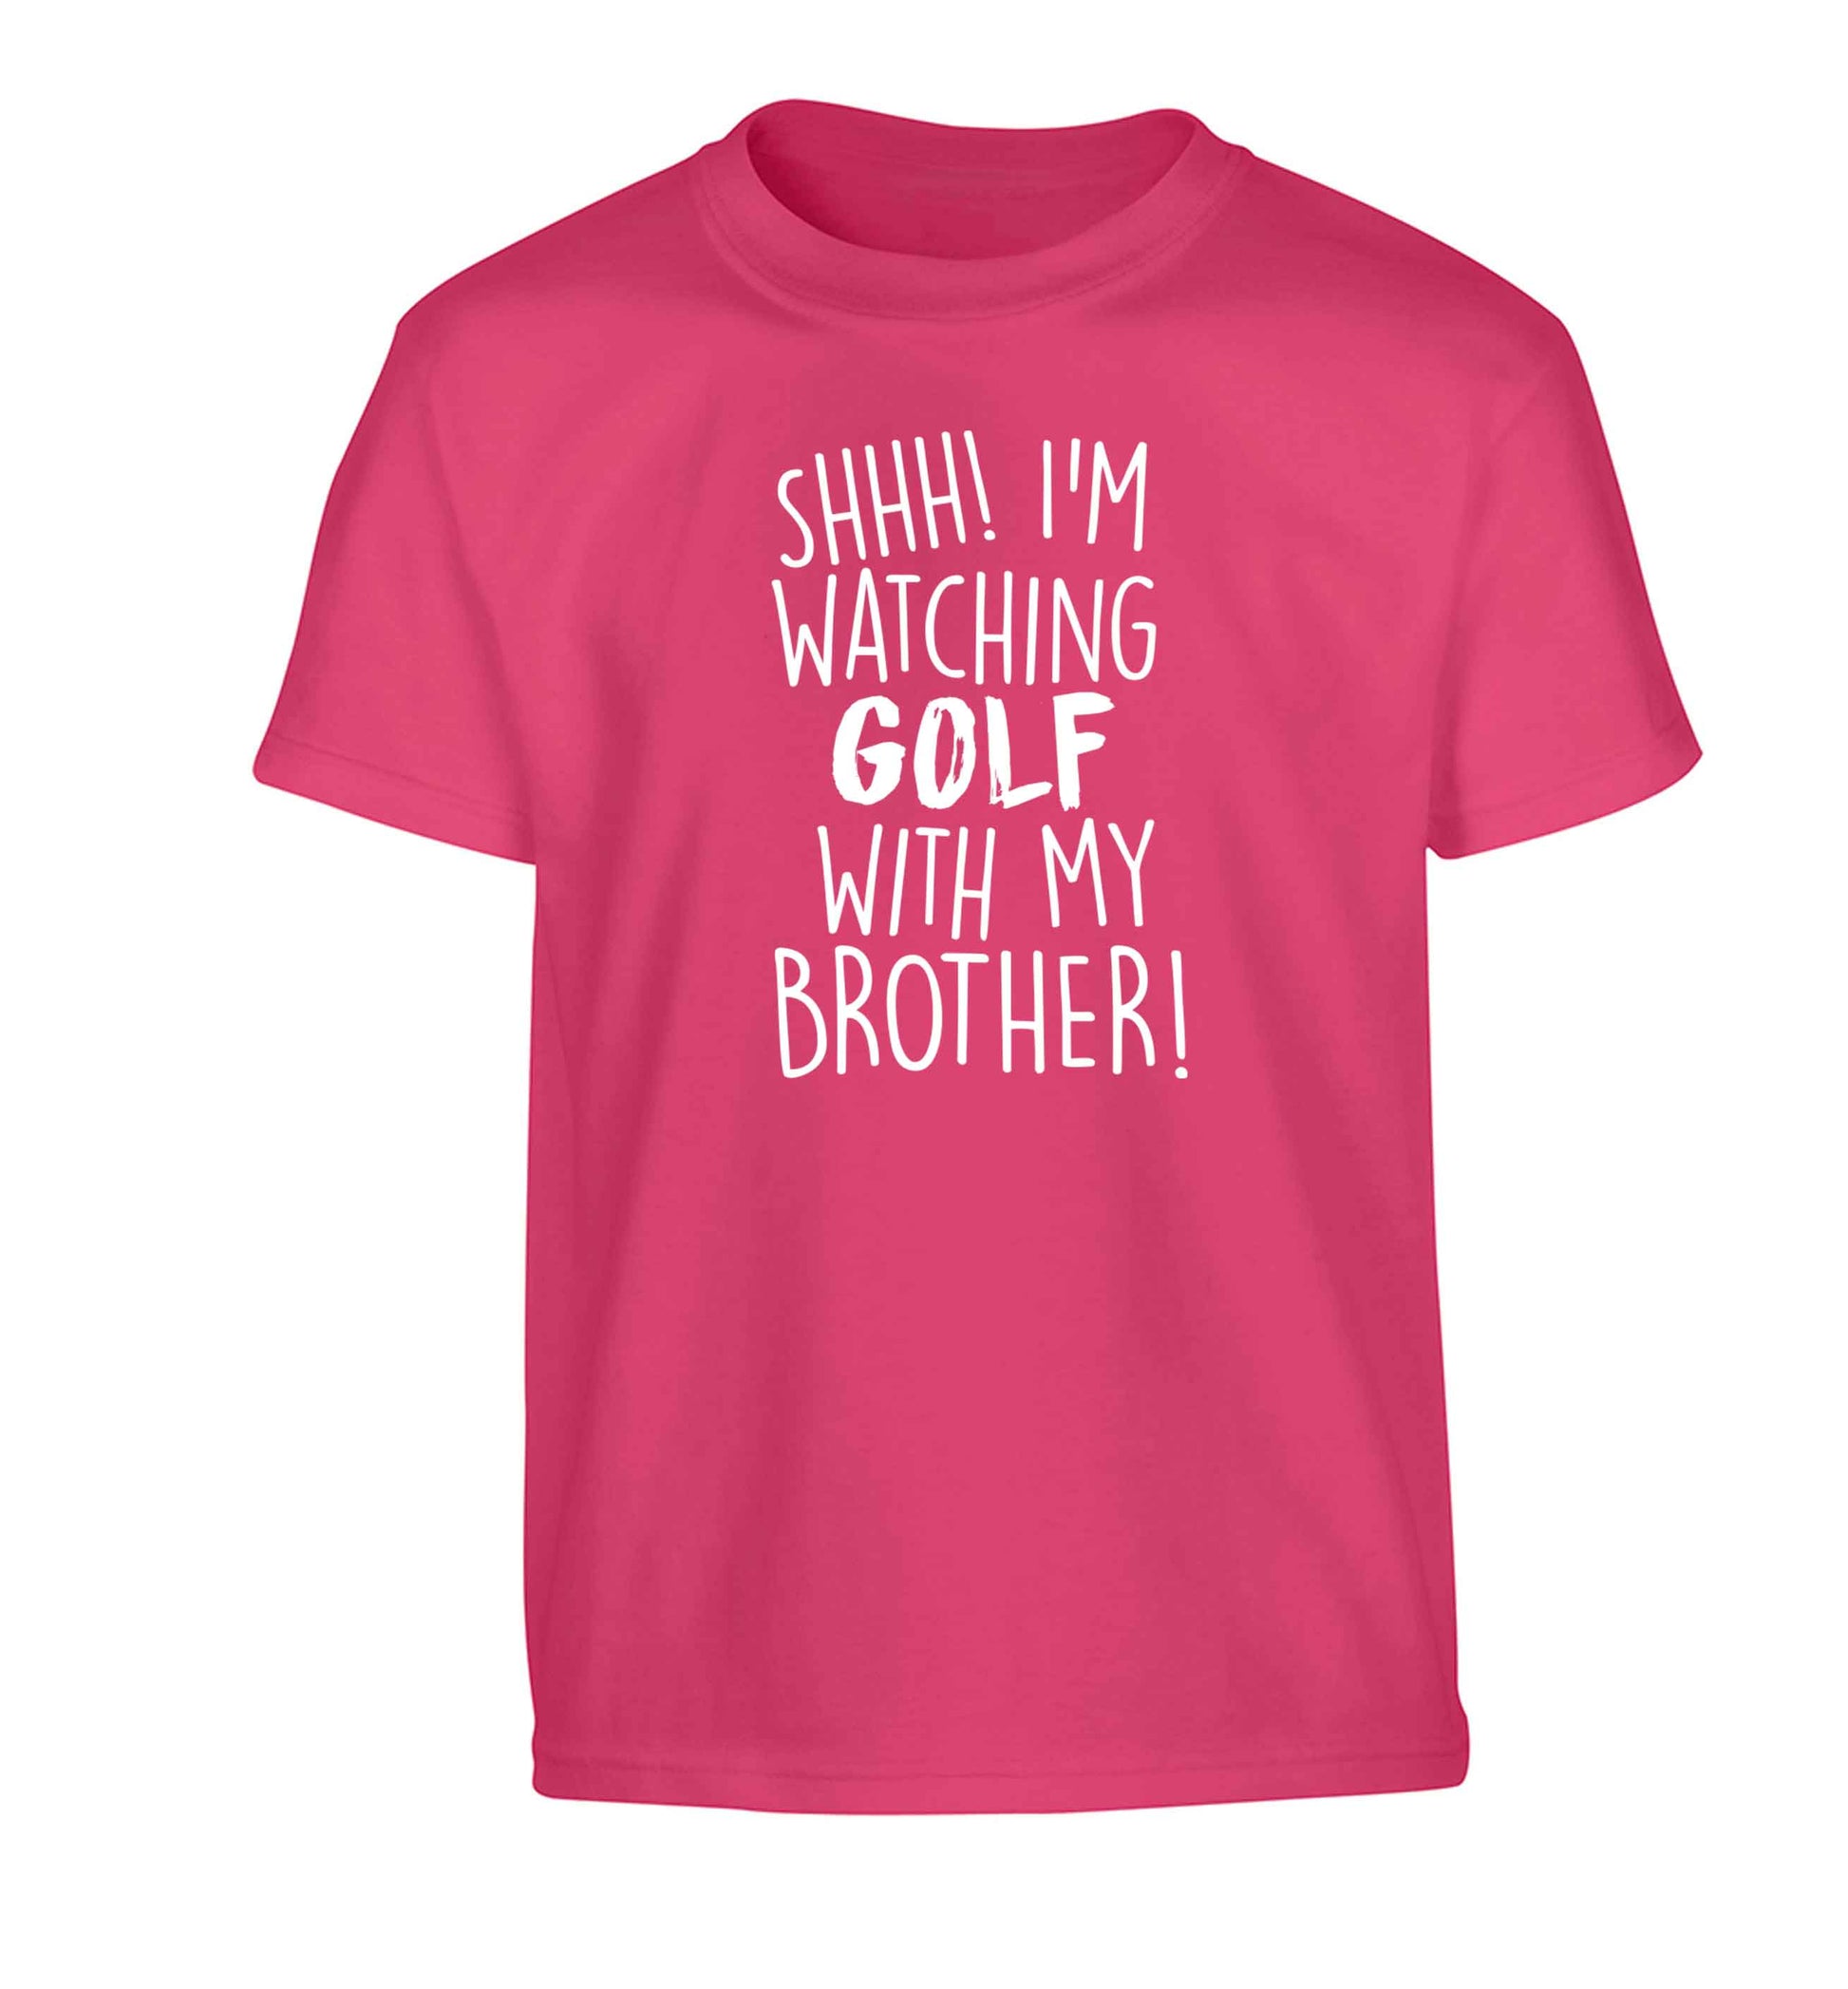 Shh I'm watching golf with my brother Children's pink Tshirt 12-13 Years